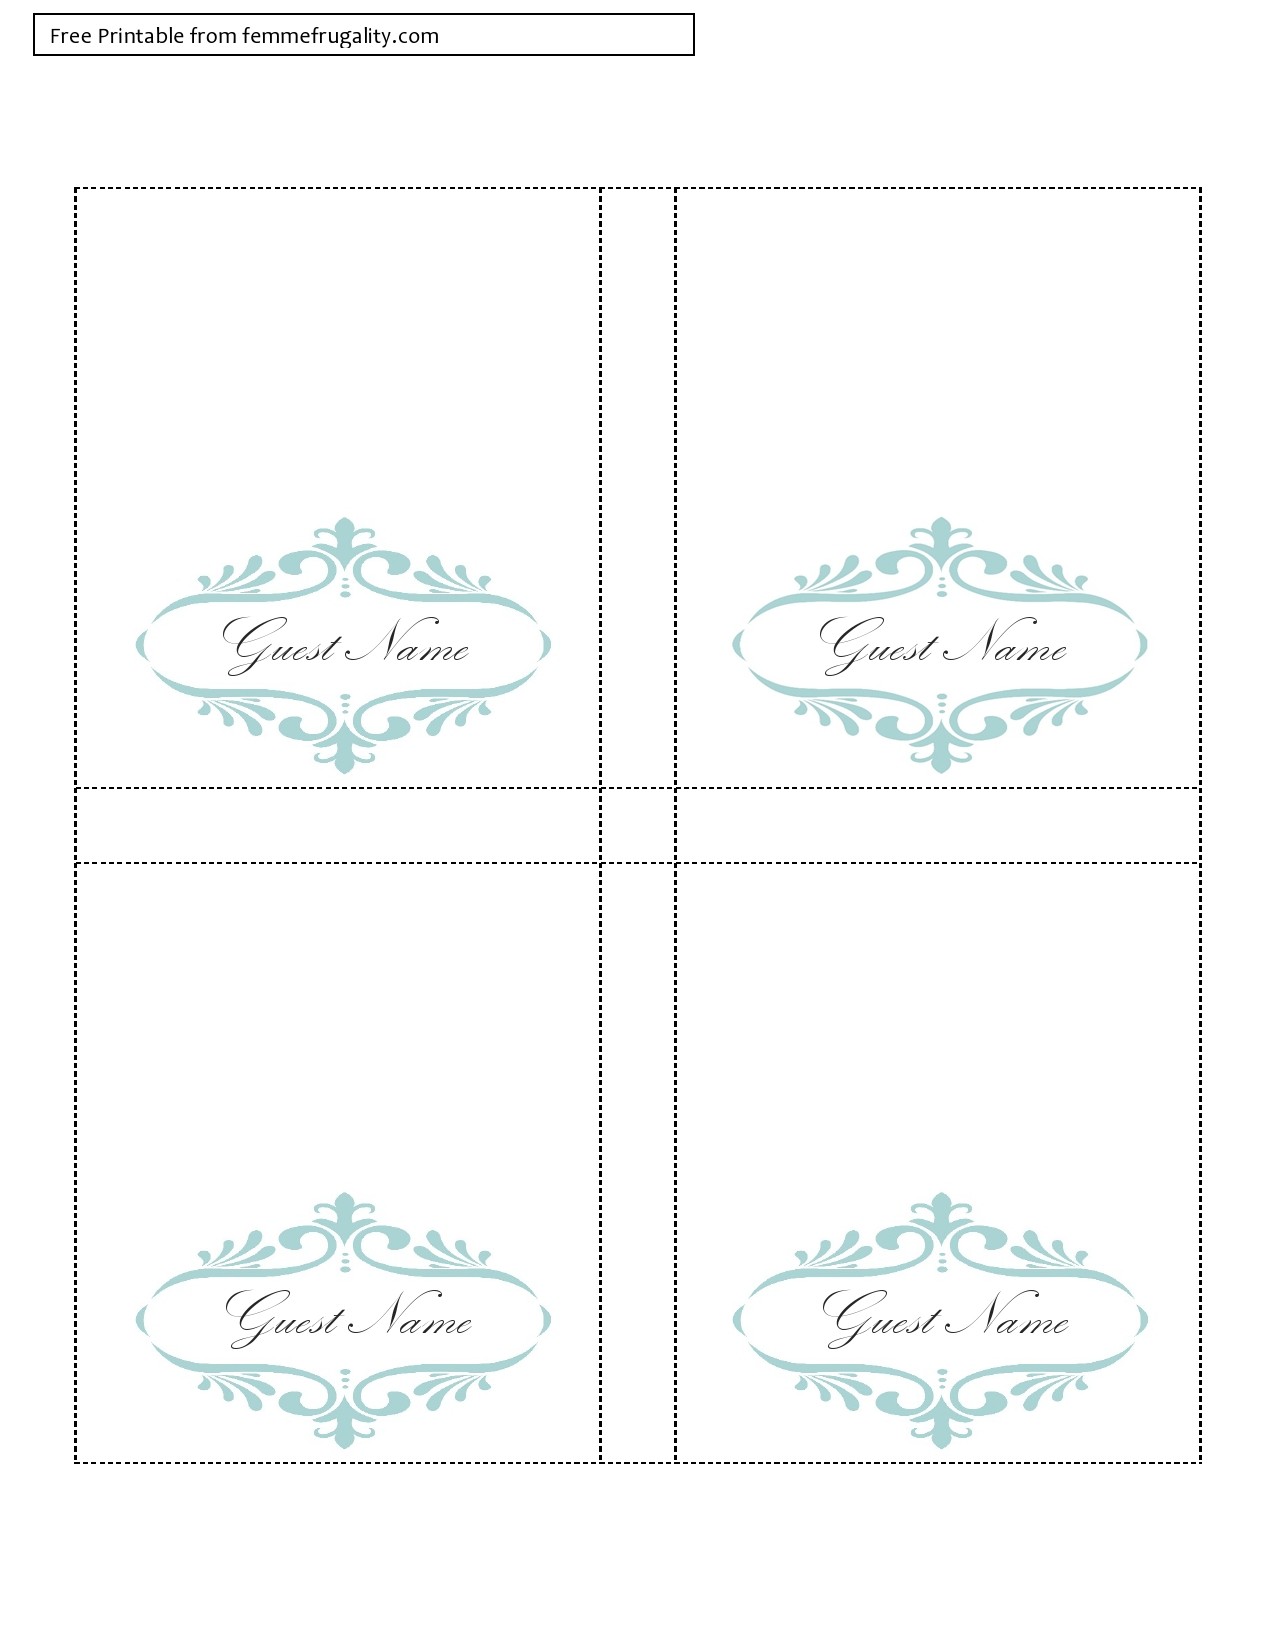 Free Printable Place Setting Cards